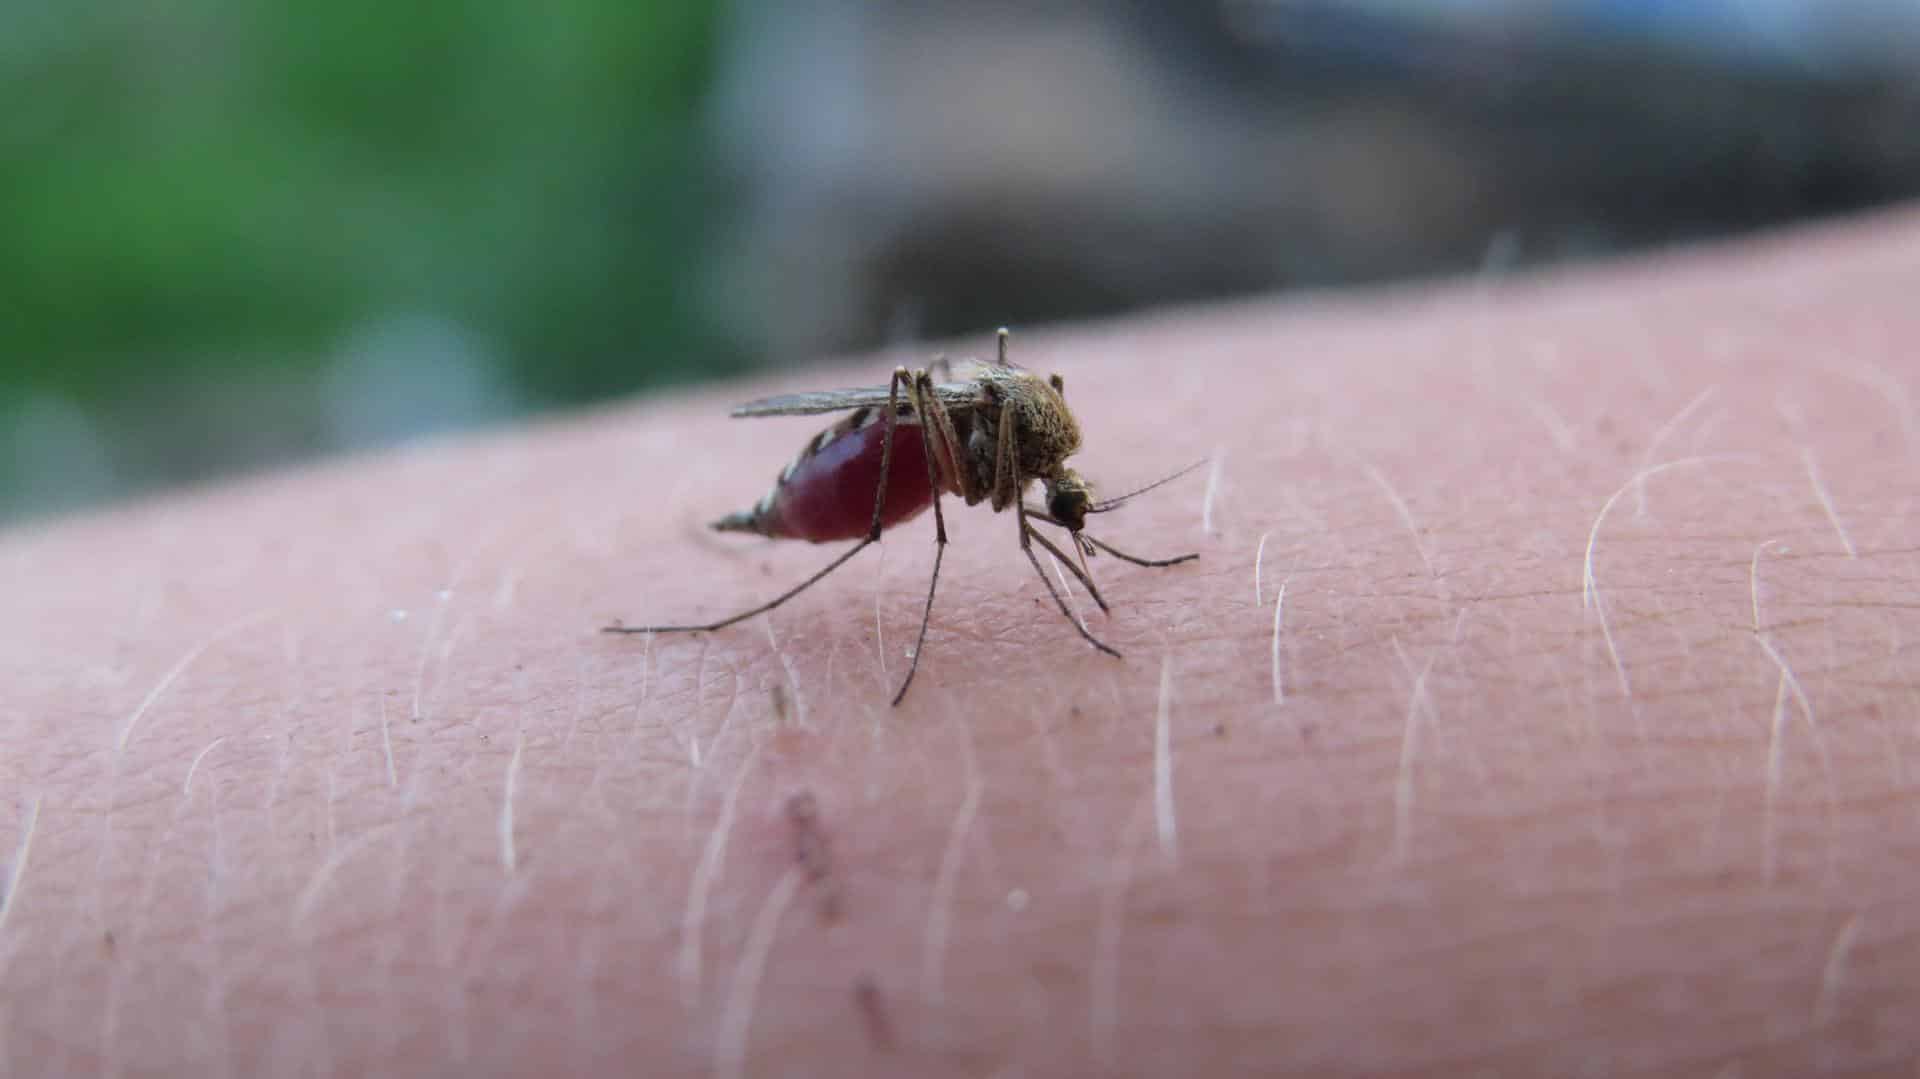 10 Easy Ways To Stop Mosquito Bites From Itching Lookout Pest Control